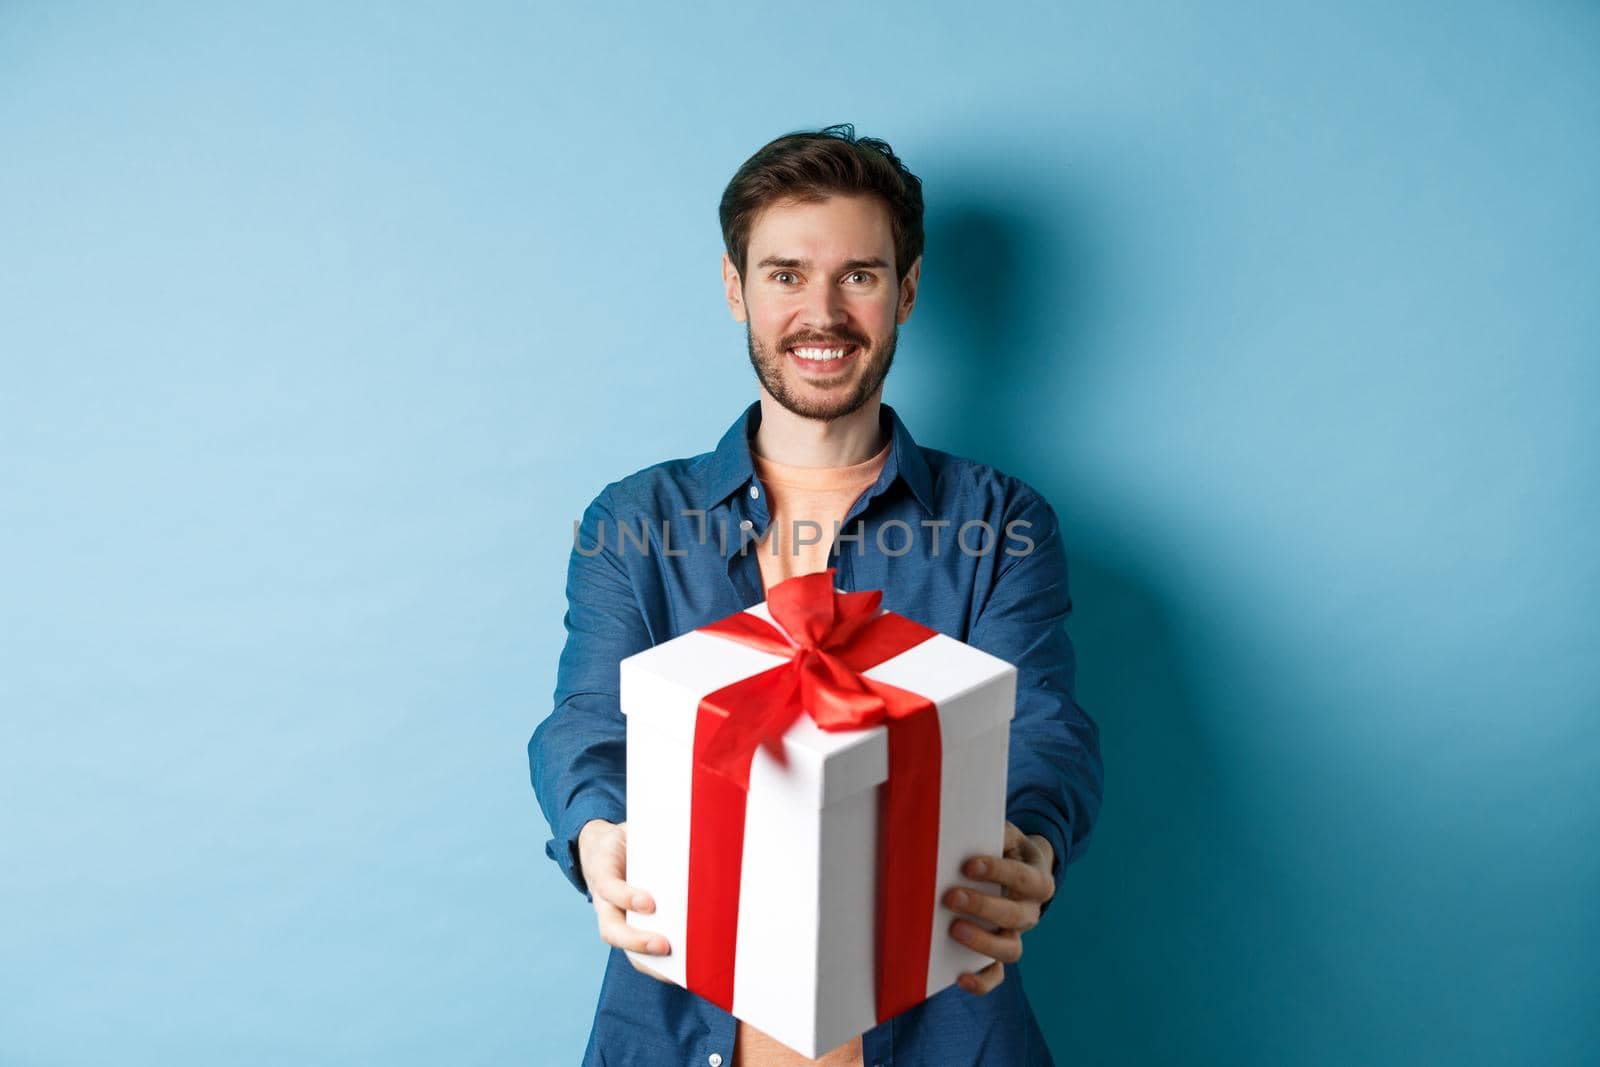 Valentines day. Handsome smiling man extending hands with gift box, wishing happy holiday. Guy making surprise present and looking cheerful, standing over blue background.